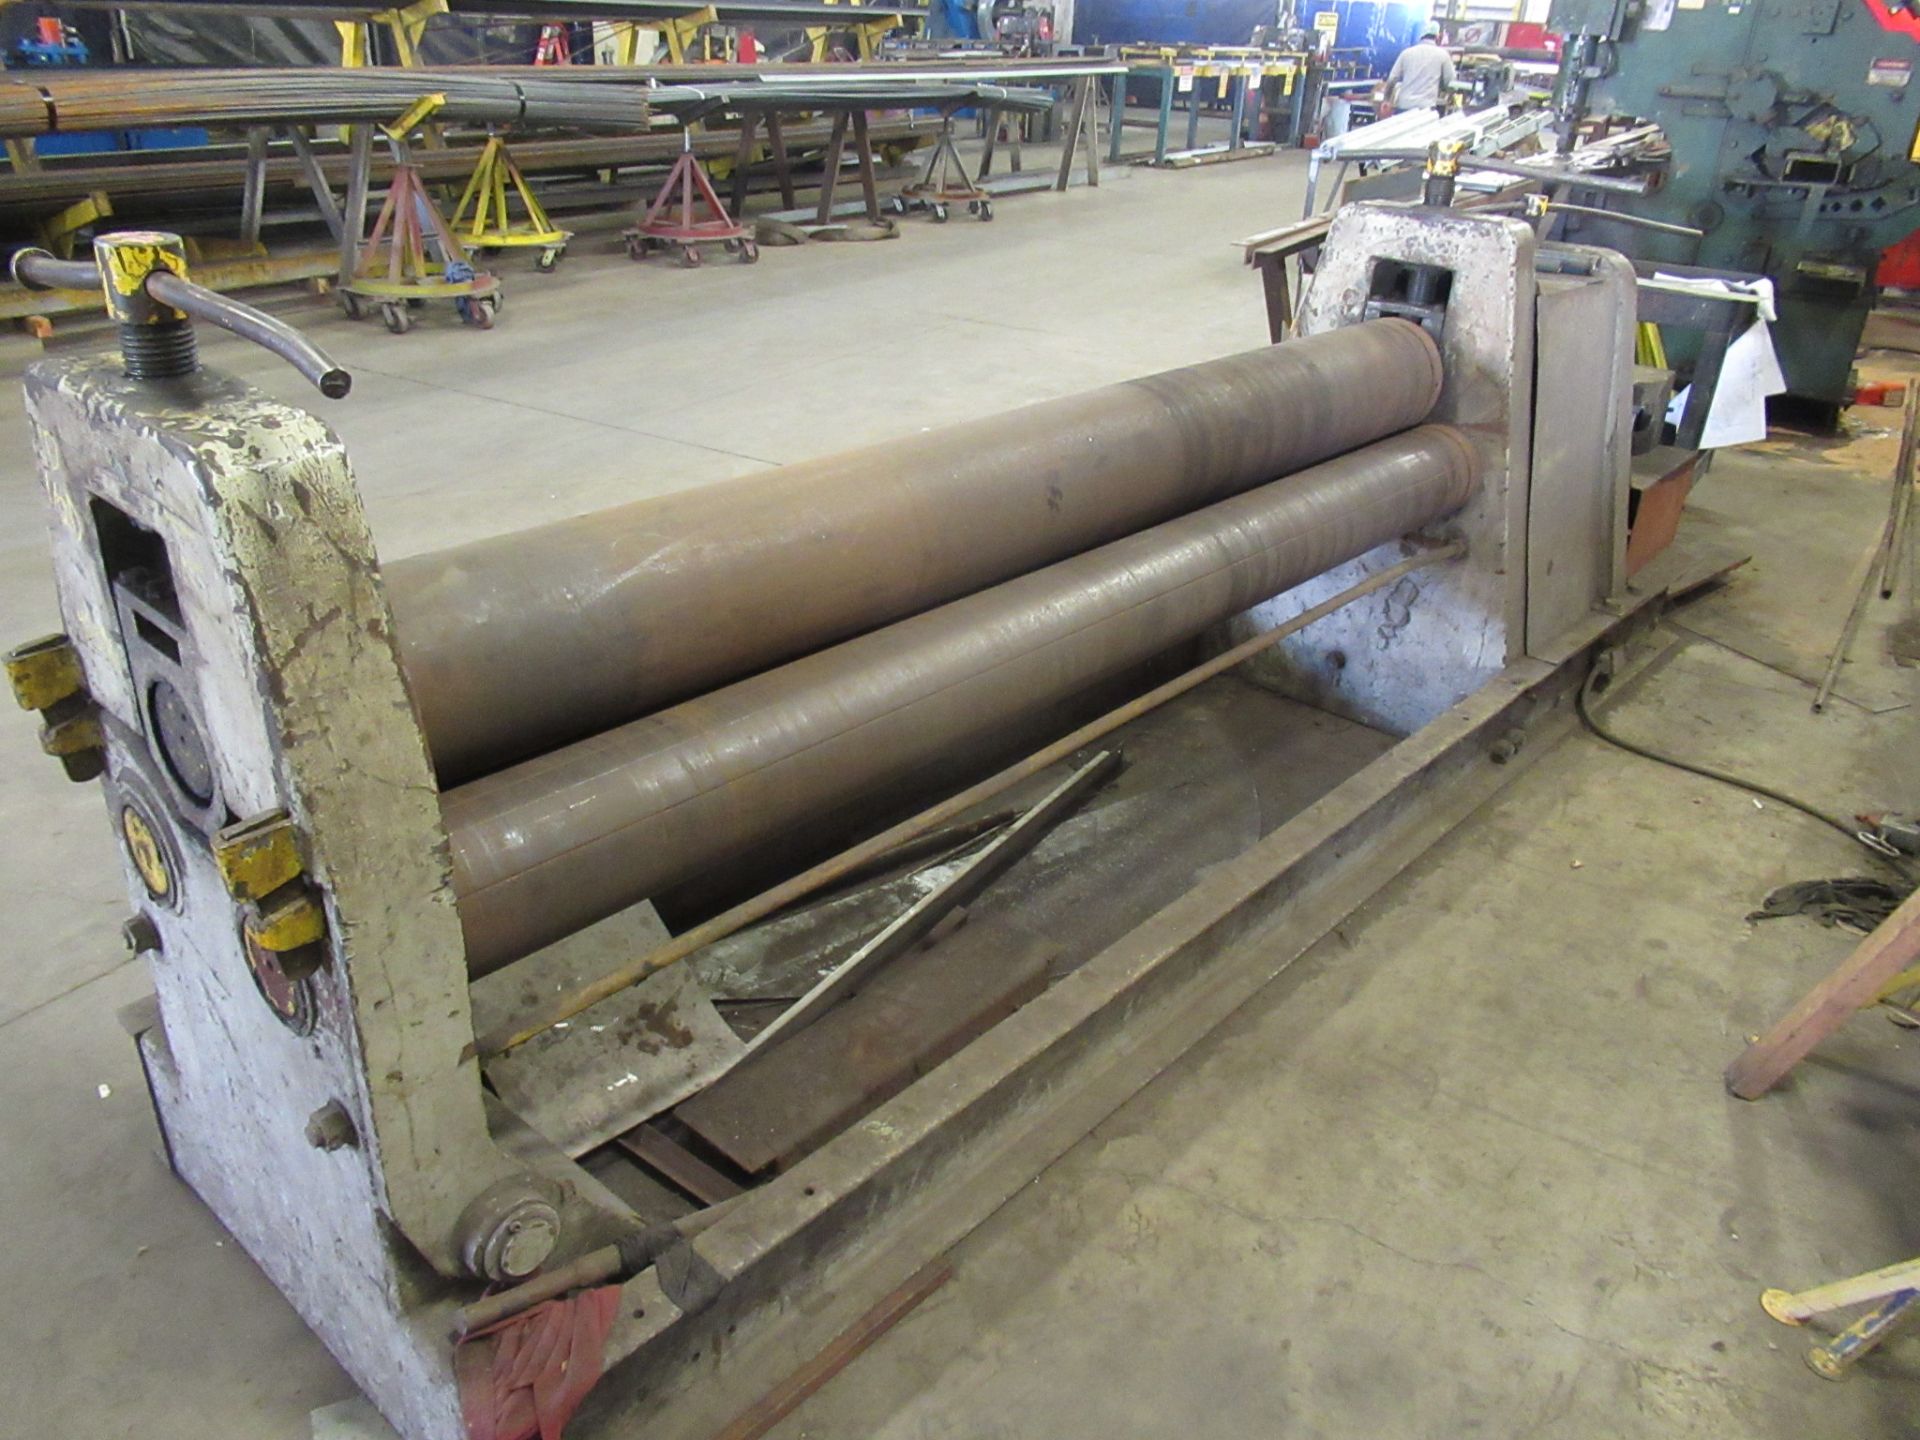 PLATE ROLL, ¾” X 8’, 9” top roll (Location 7: McCorvey Industrial Fabrication, 8610 Wallisville - Image 4 of 4